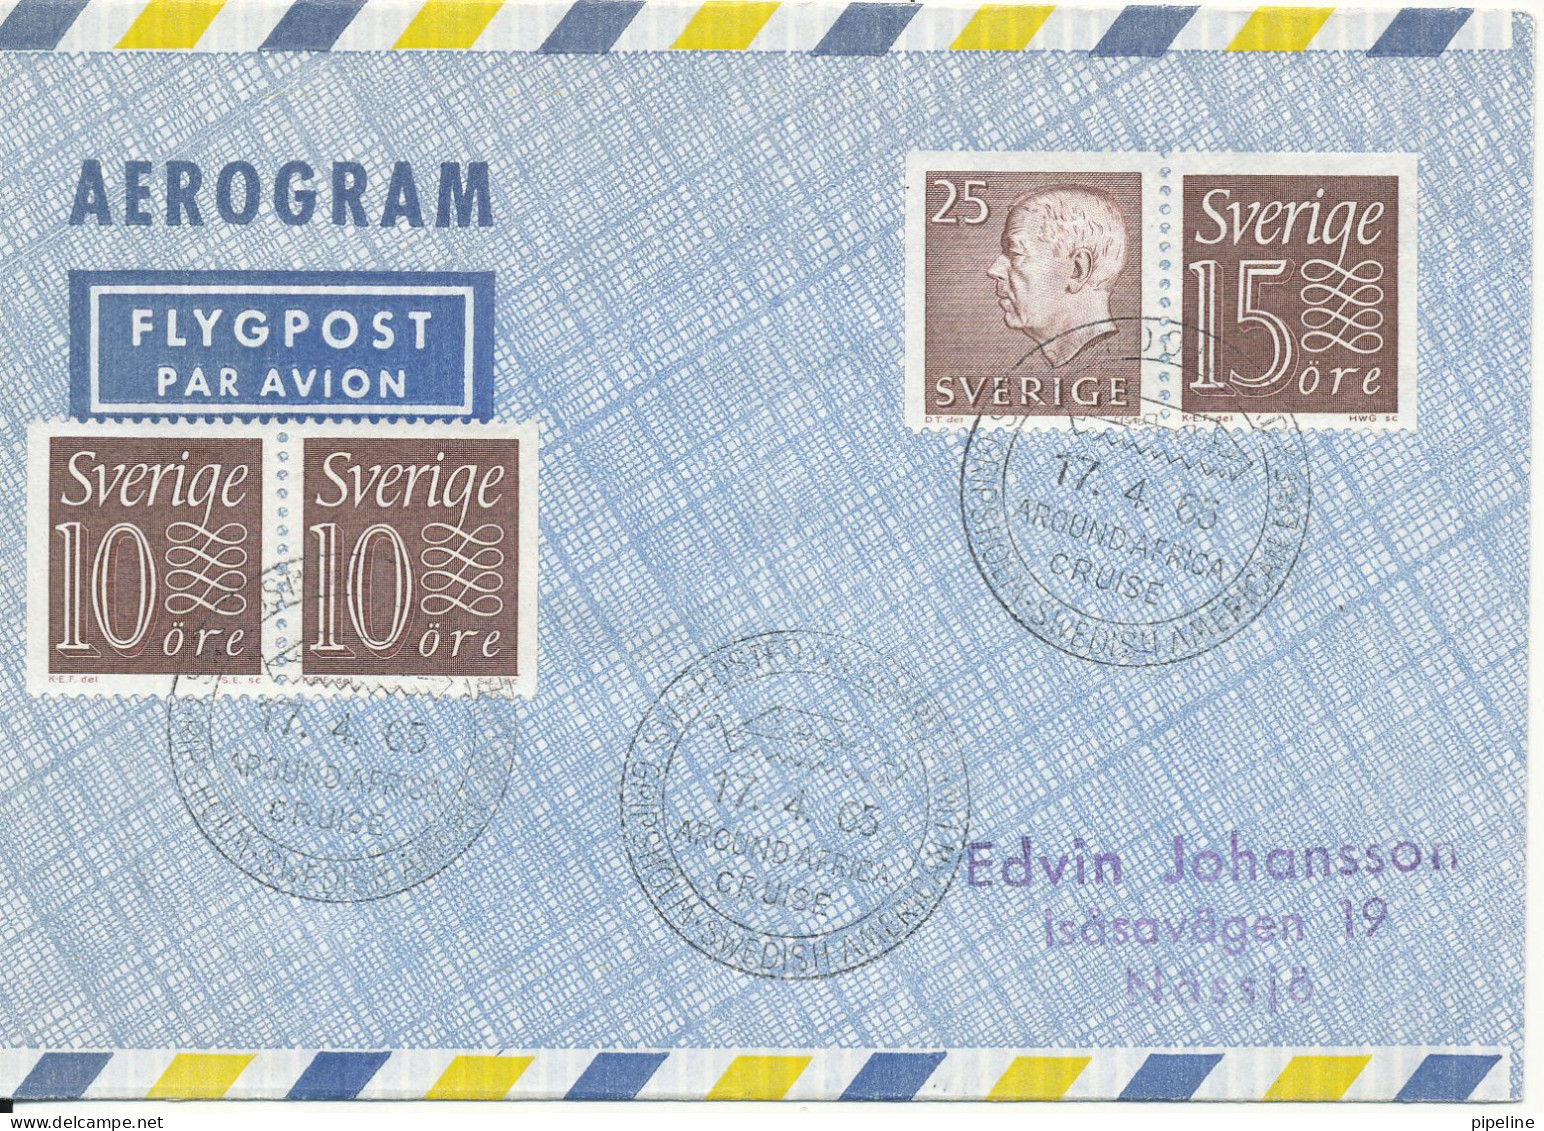 Sweden Aerogramme Ship Cover Posted On Board Swedish - America Line GRIPSHOLM Around Africa Cruise - Lettres & Documents